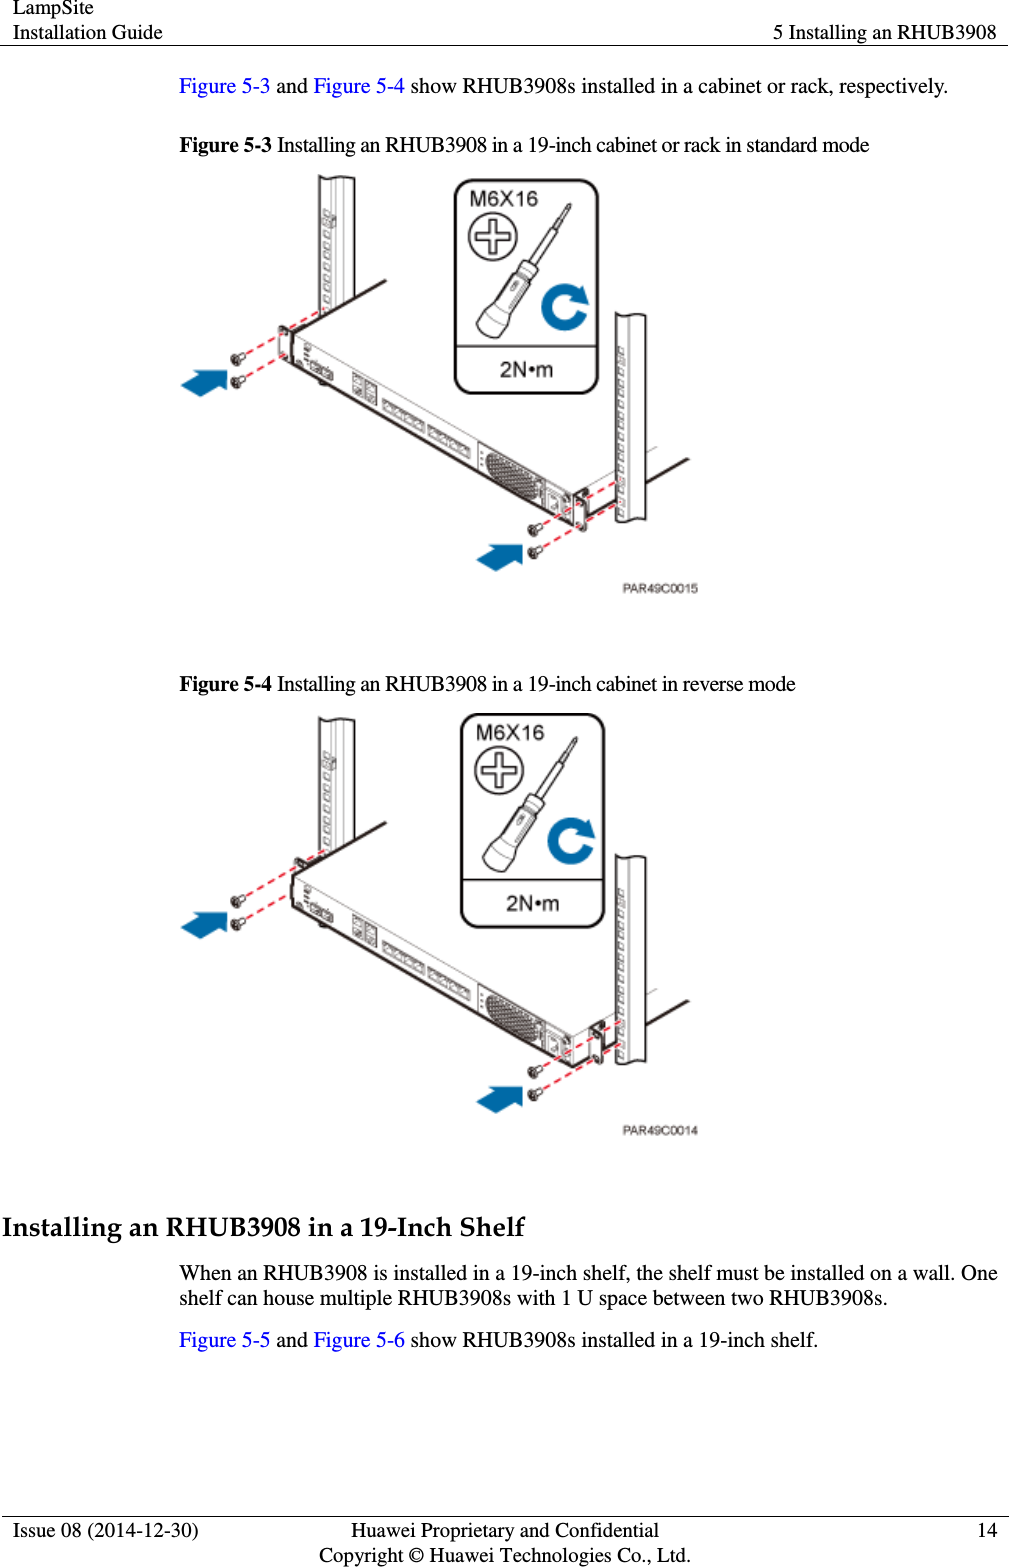 LampSite Installation Guide 5 Installing an RHUB3908  Issue 08 (2014-12-30) Huawei Proprietary and Confidential                                     Copyright © Huawei Technologies Co., Ltd. 14  Figure 5-3 and Figure 5-4 show RHUB3908s installed in a cabinet or rack, respectively.   Figure 5-3 Installing an RHUB3908 in a 19-inch cabinet or rack in standard mode   Figure 5-4 Installing an RHUB3908 in a 19-inch cabinet in reverse mode   Installing an RHUB3908 in a 19-Inch Shelf When an RHUB3908 is installed in a 19-inch shelf, the shelf must be installed on a wall. One shelf can house multiple RHUB3908s with 1 U space between two RHUB3908s.   Figure 5-5 and Figure 5-6 show RHUB3908s installed in a 19-inch shelf.   